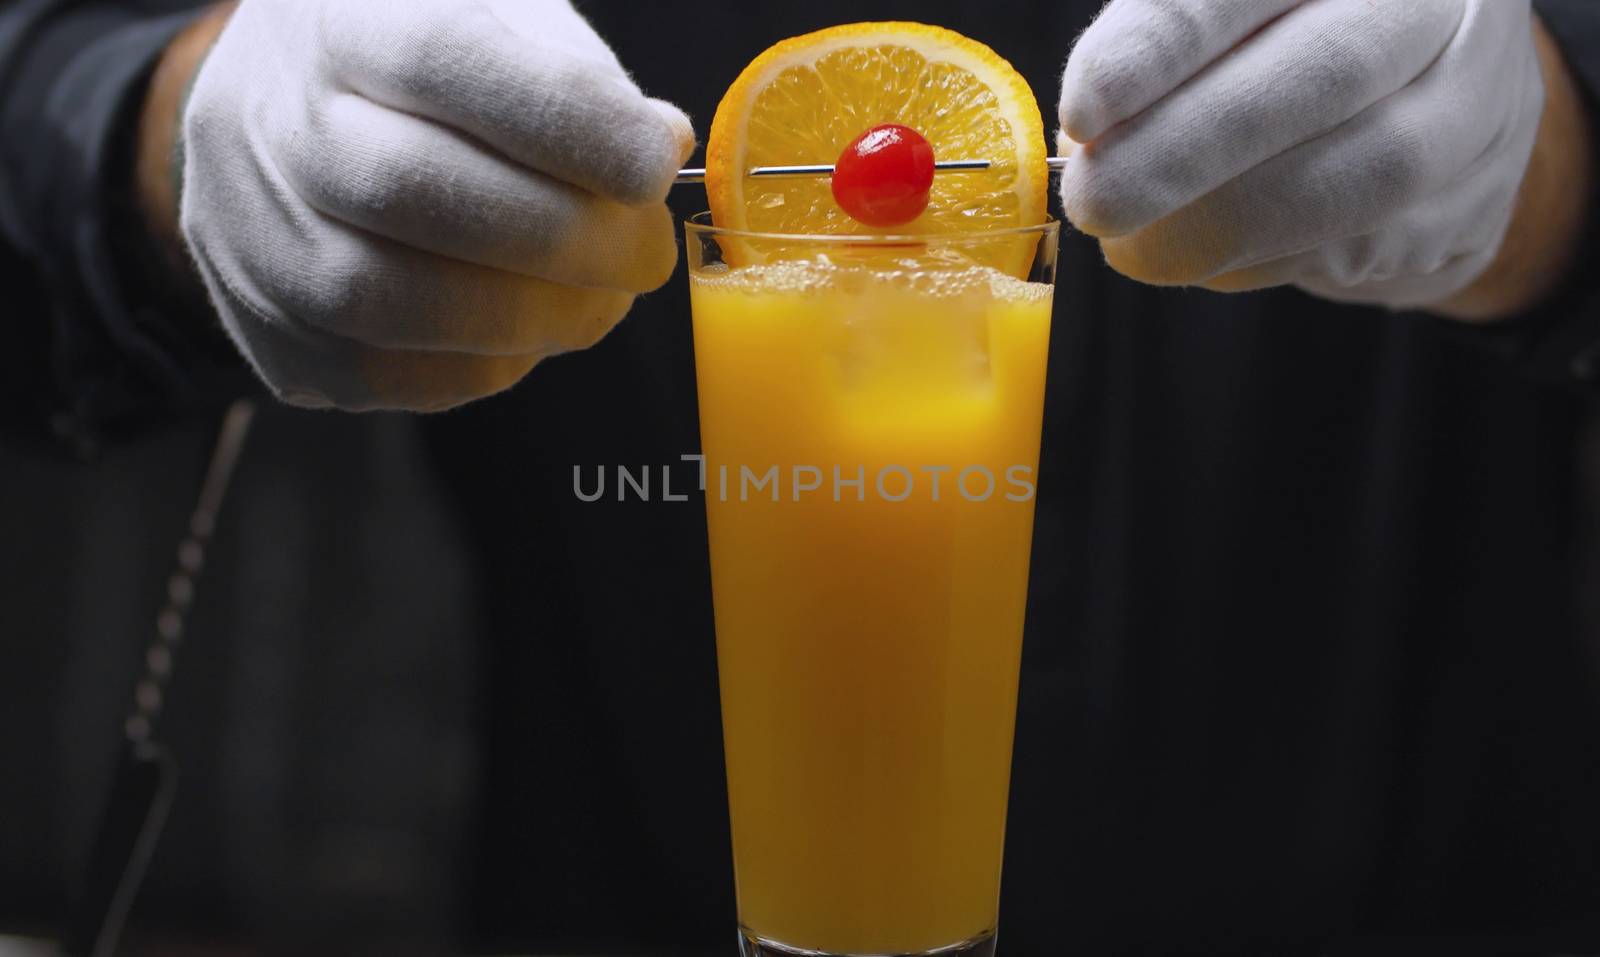 Preparing a Tequila Sunrise Cocktail. Close up bartenders hands garnish it with orange and cherry on skewer.